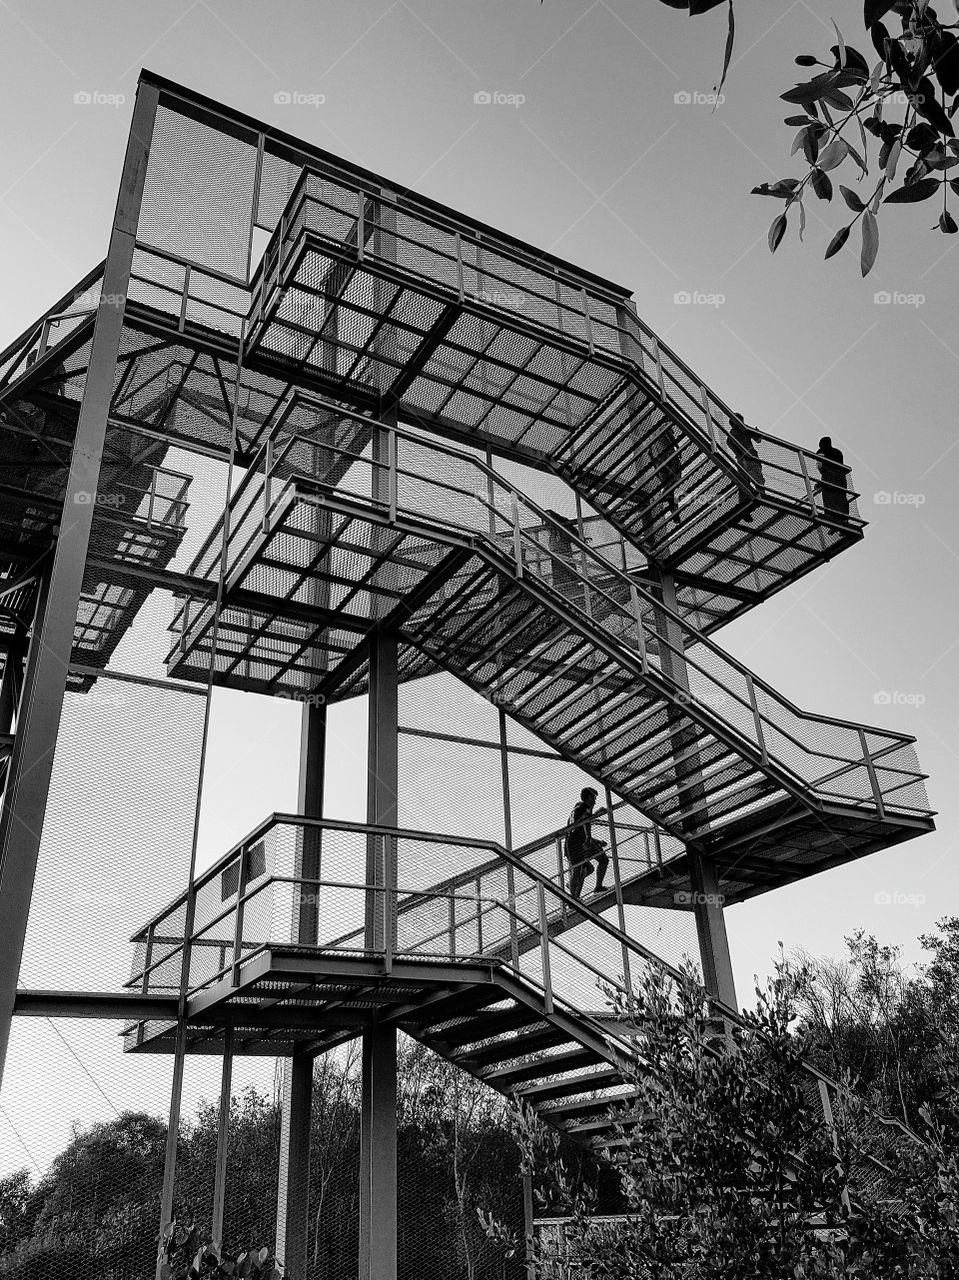 Black and white shot: The skywalk structure in Thailand